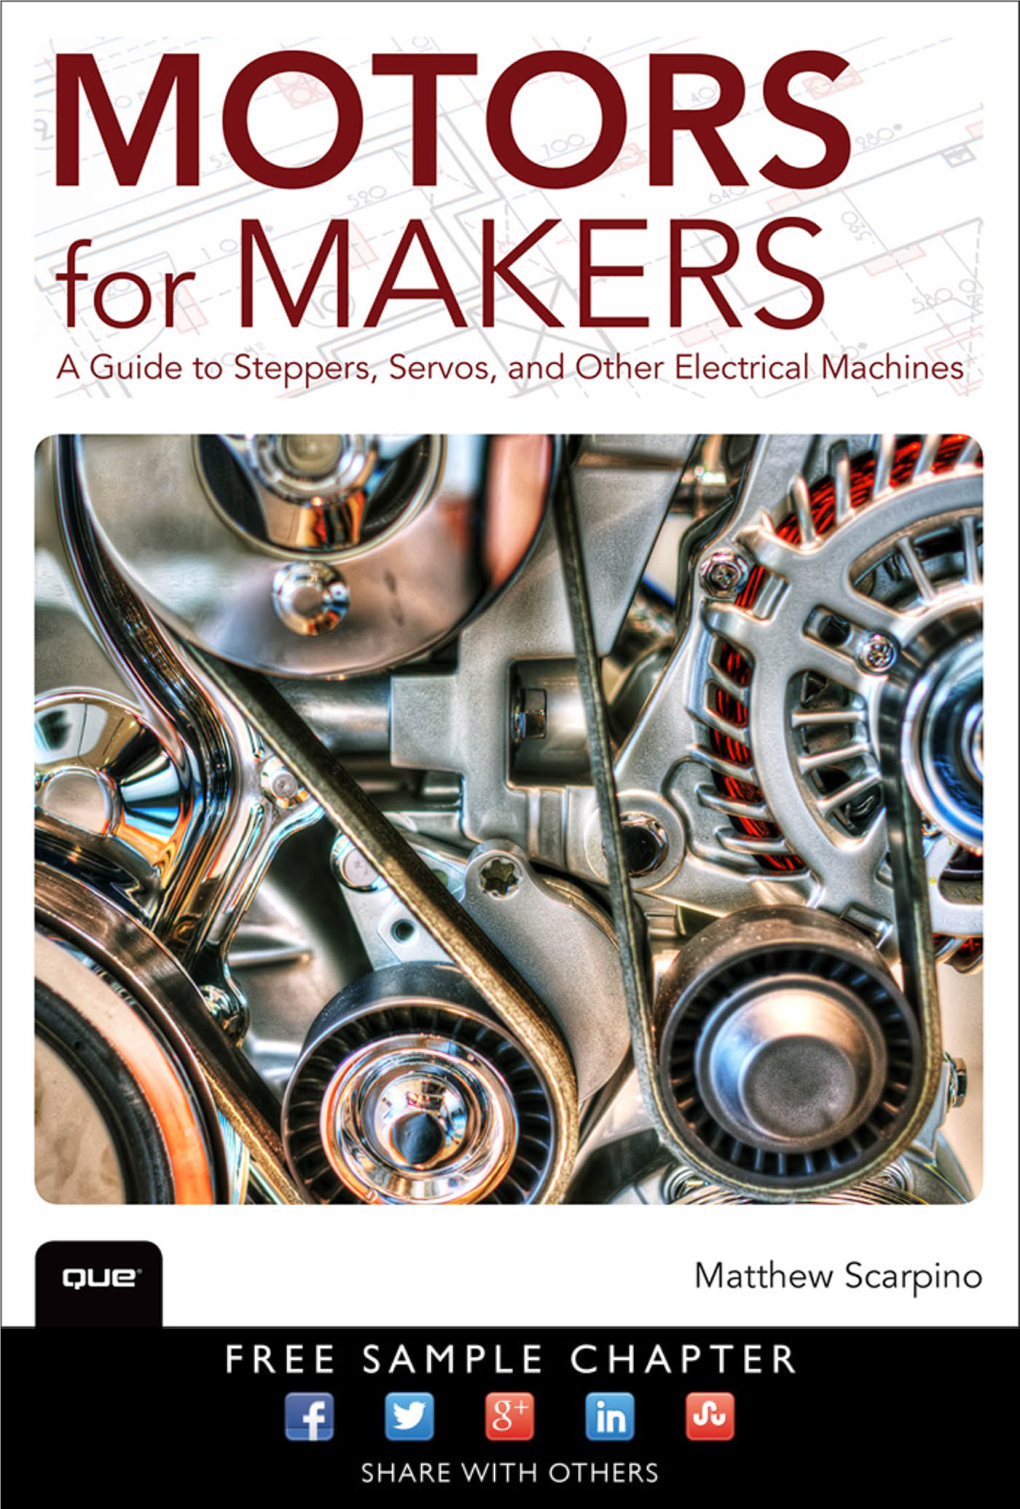 Motors for Makers: a Guide to Steppers, Servos, and Other